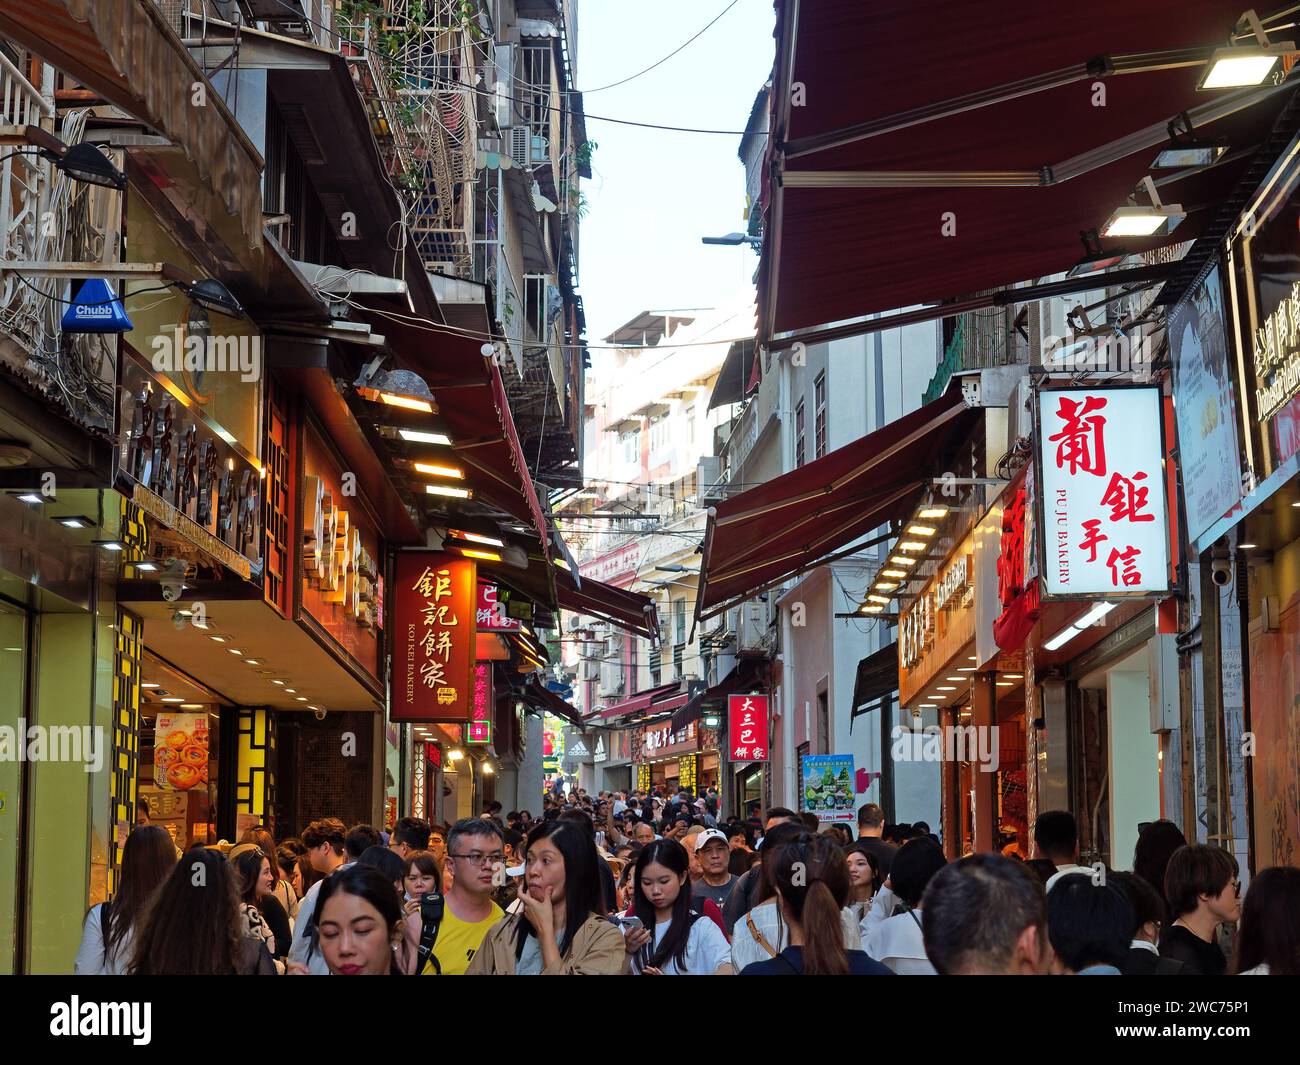 Typical busy narrow street in Macau congested with people, shops, bars, and restaurants Stock Photo